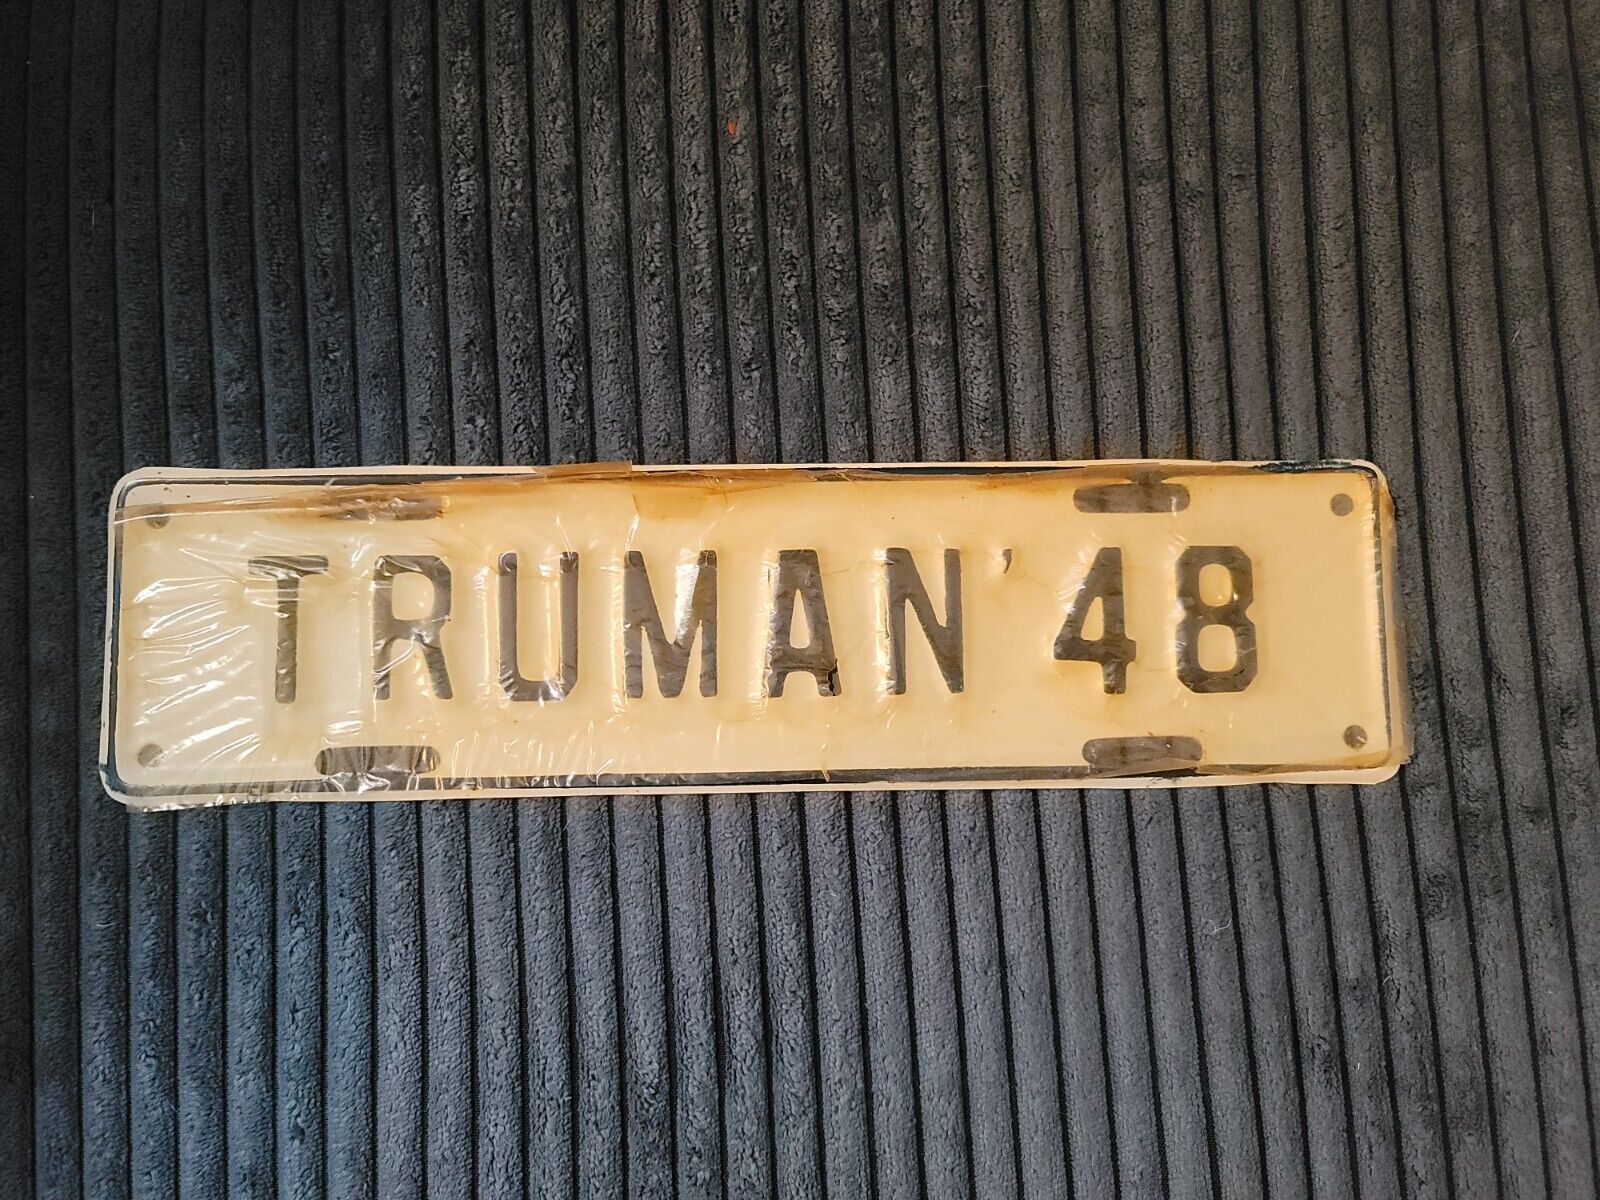 Truman 48 Metal License Plate From The 1948 Presidential Campaign/Election